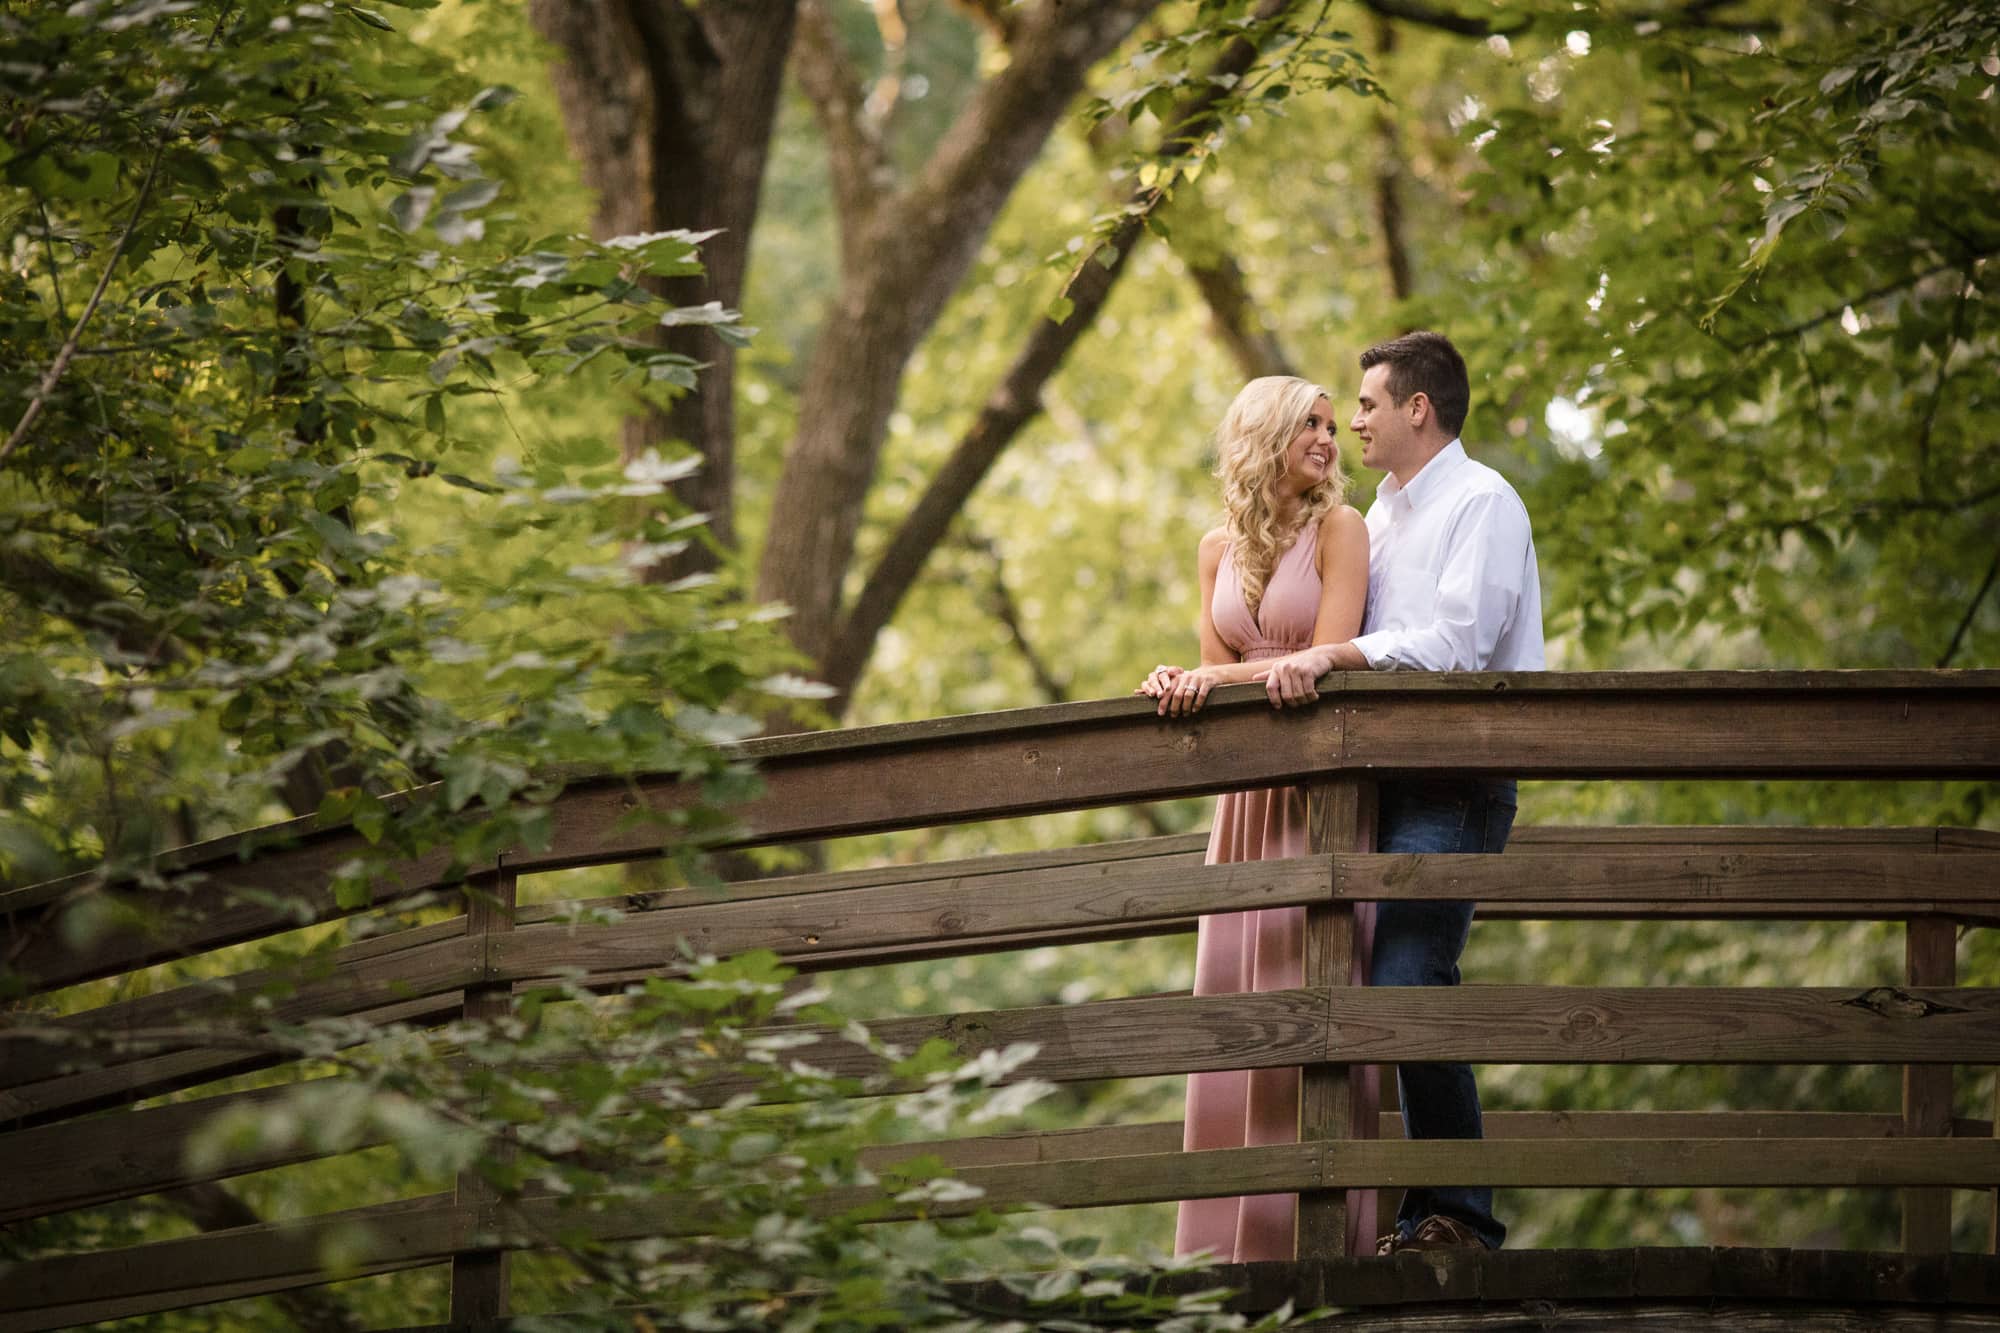 Couple smiling at one another standing on bridge in wooded park in Asheville, North Carolina photography done by Kathy Beaver.